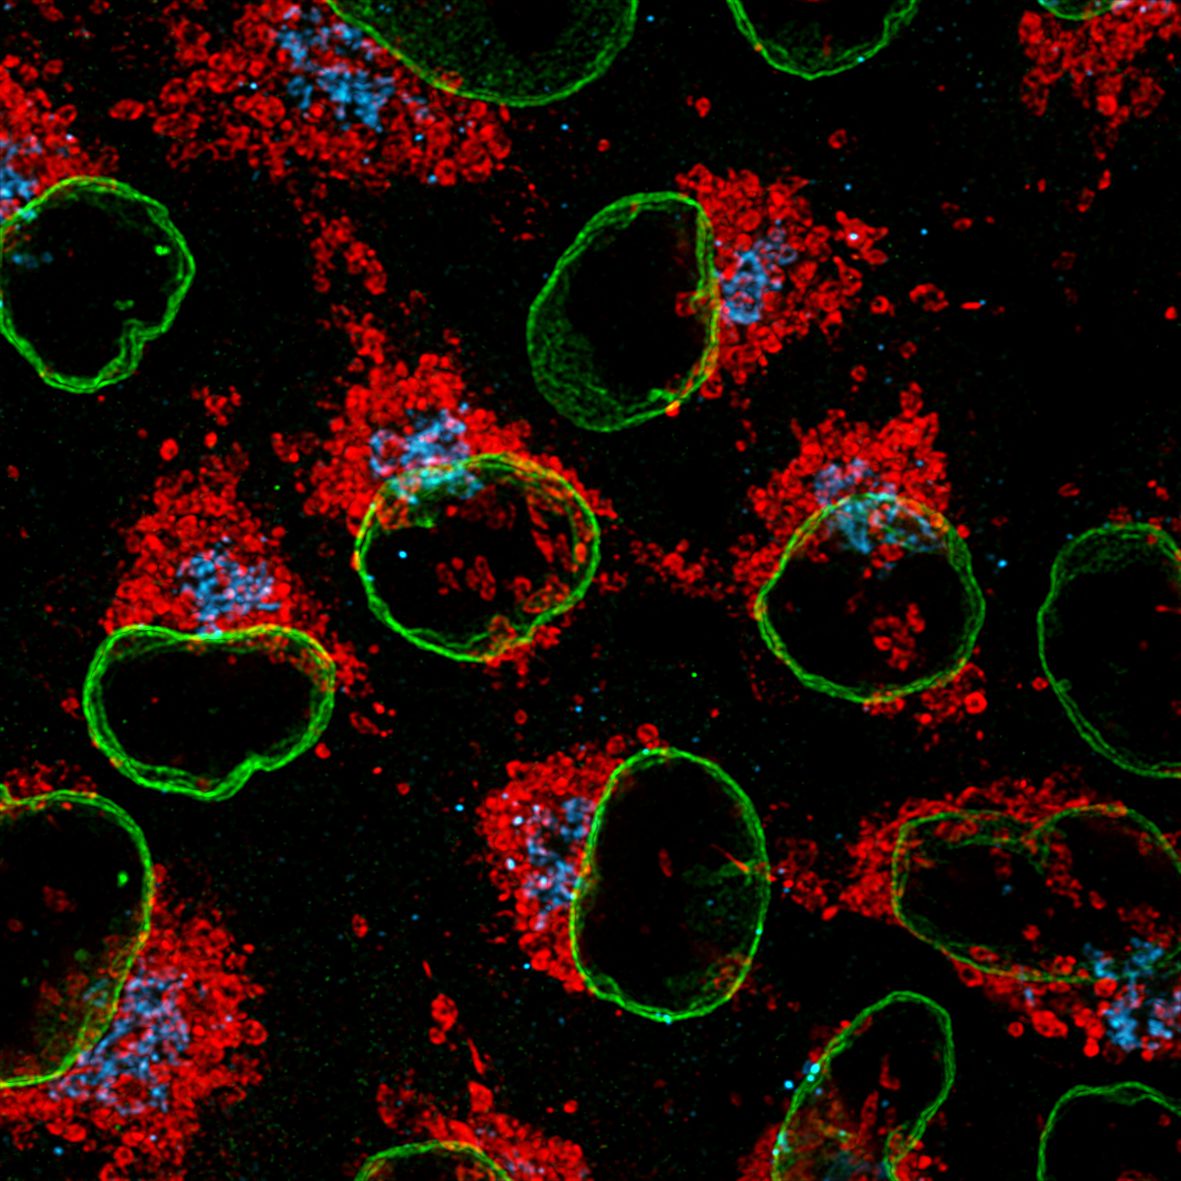 Immunofluorescence of HeLa: PFA-fixed HeLa cells were stained with anti-Lamin B1 (66095-1-Ig) labeled with FlexAble CoraLite® 488 Kit (KFA021, green), anti-HSP60 (66041-1-Ig) labeled with FlexAble CoraLite® Plus 555 Kit (KFA022, red) and anti-GORASP2 (66627-1-Ig) labeled with FlexAble CoraLite® Plus 647 Kit (KFA023, cyan).​ Confocal images were acquired with a 100x oil objective and post-processed. Images were recorded at the Core Facility Bioimaging at the Biomedical Center, LMU Munich.